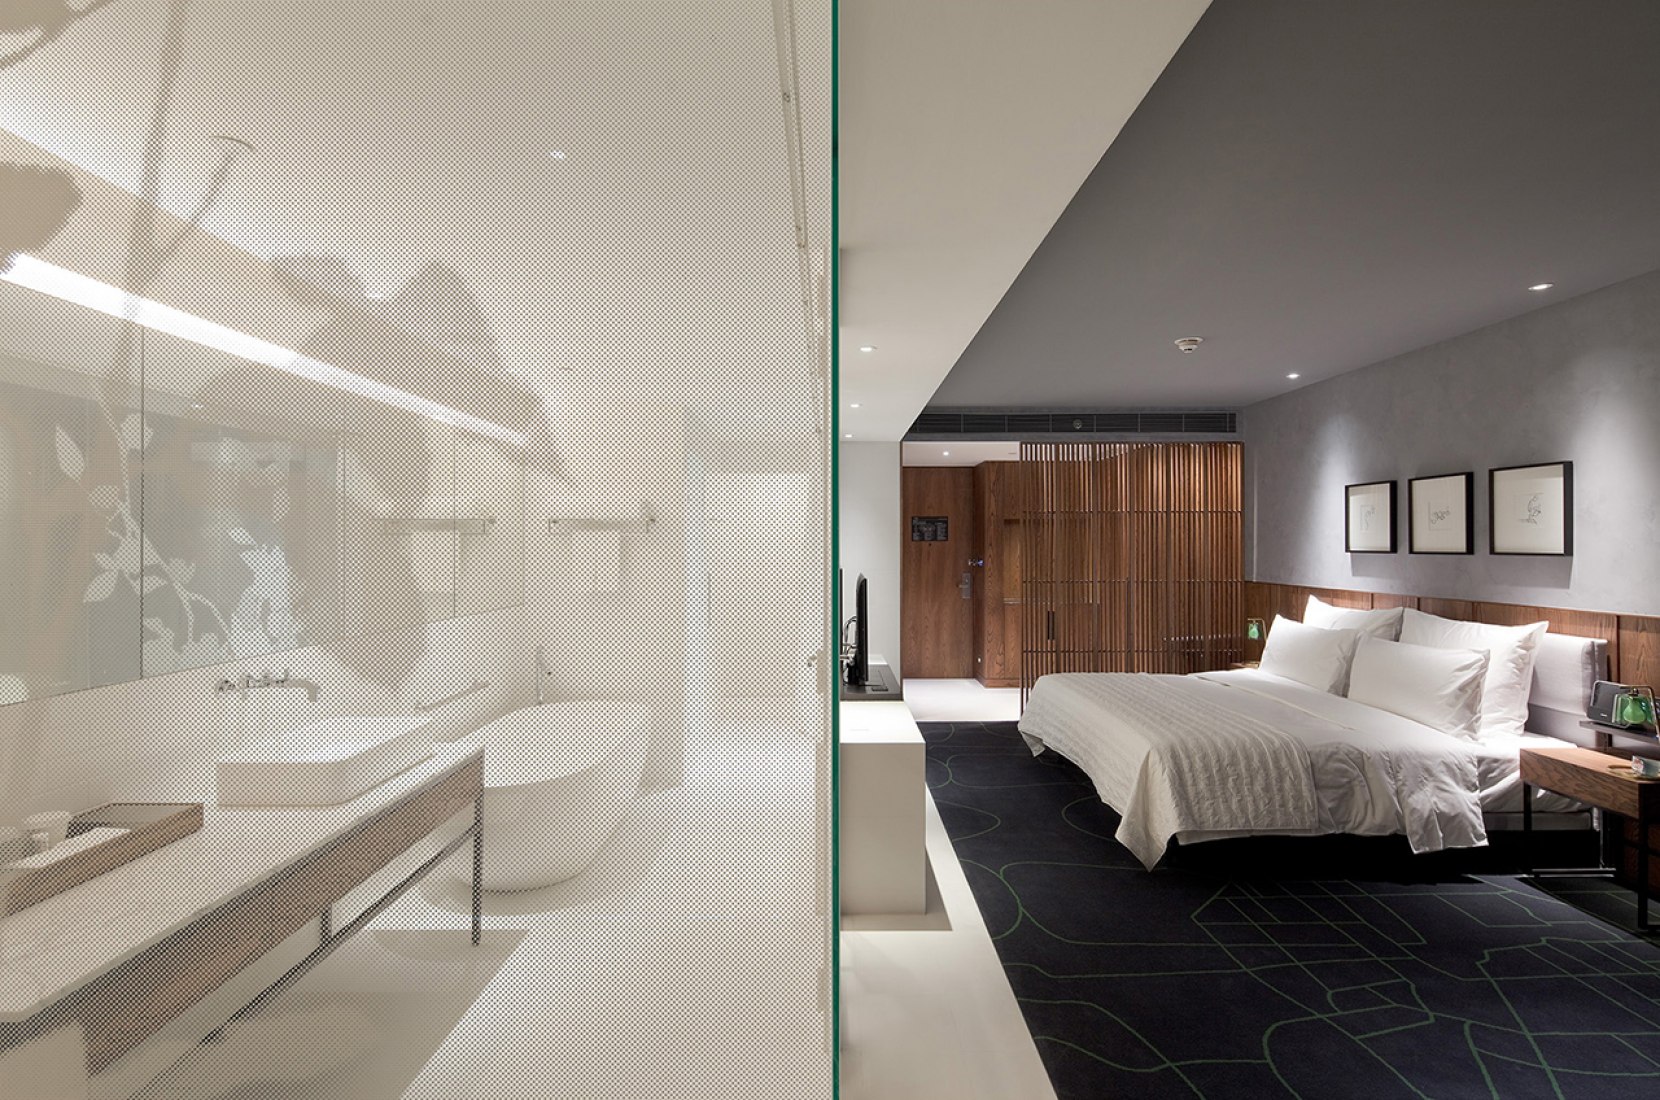 The Archives. Le Meridien Hotel by Neri&Hu | The Strength of ...